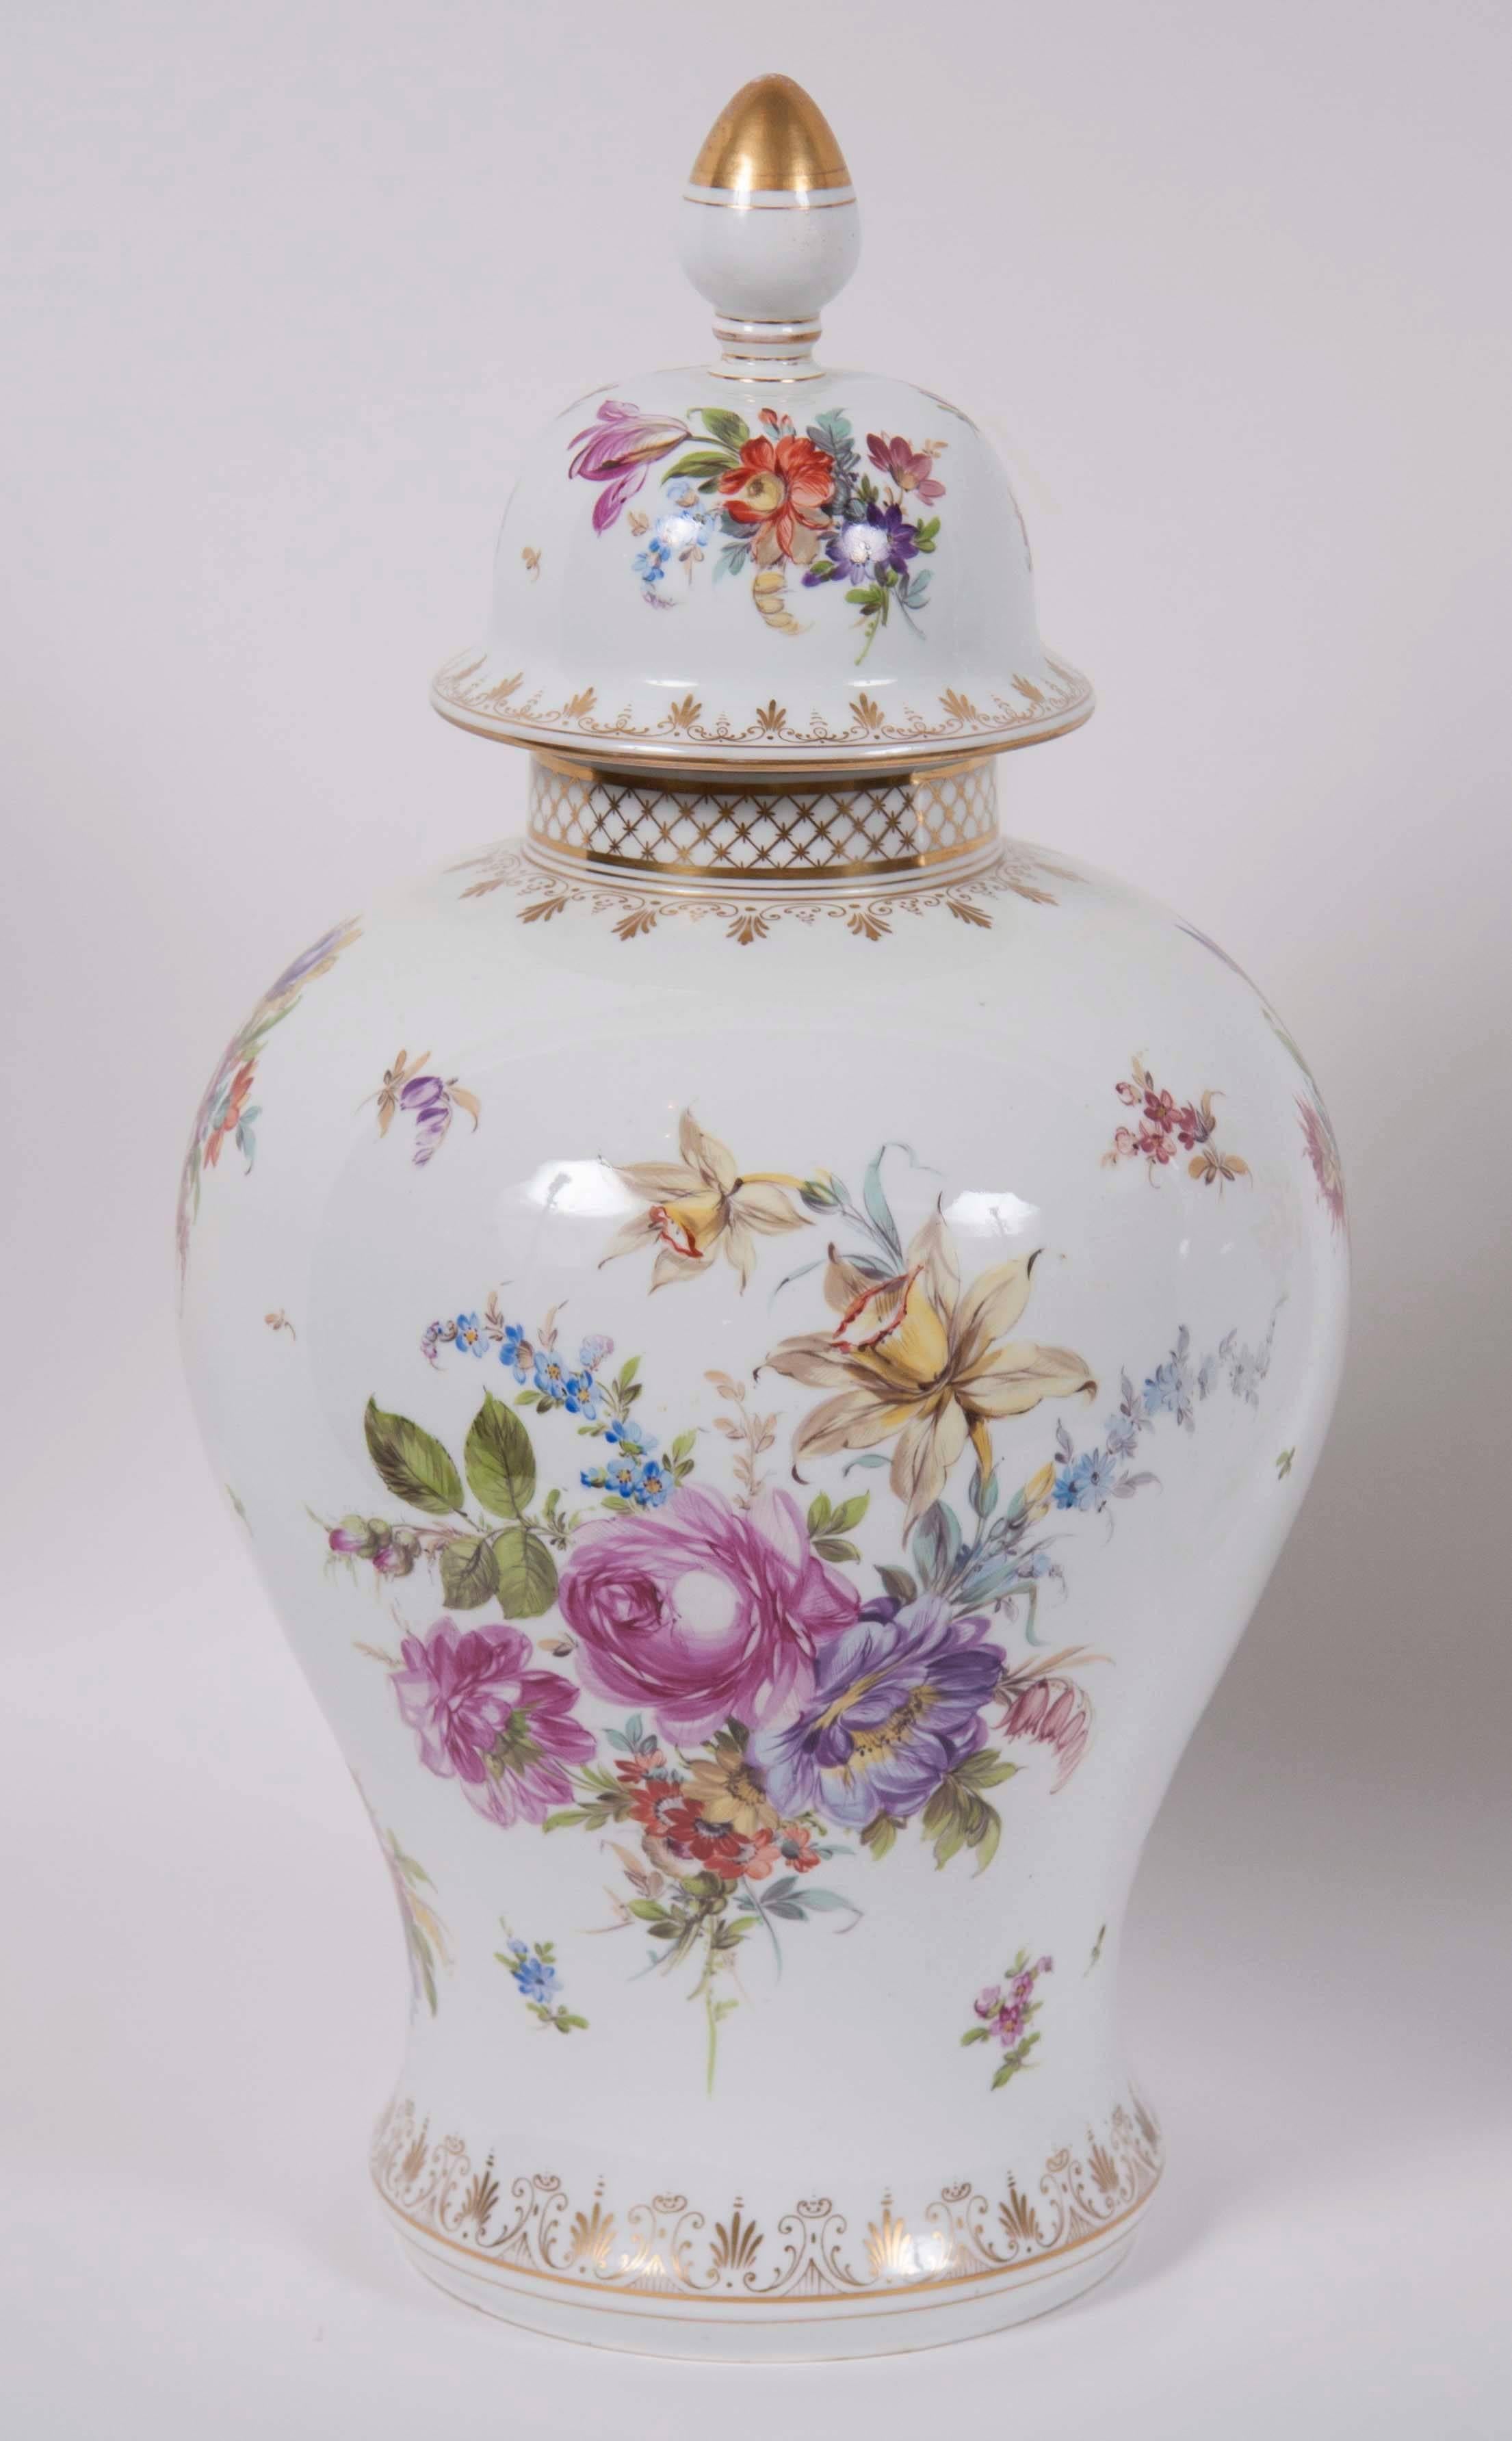 A pair of porcelain covered jars decorated with floral bouquets. The jars bear the mark of the German factory of Carl Thieme of Potschappel (Dresden), which was active in the third quarter of the 19th century.